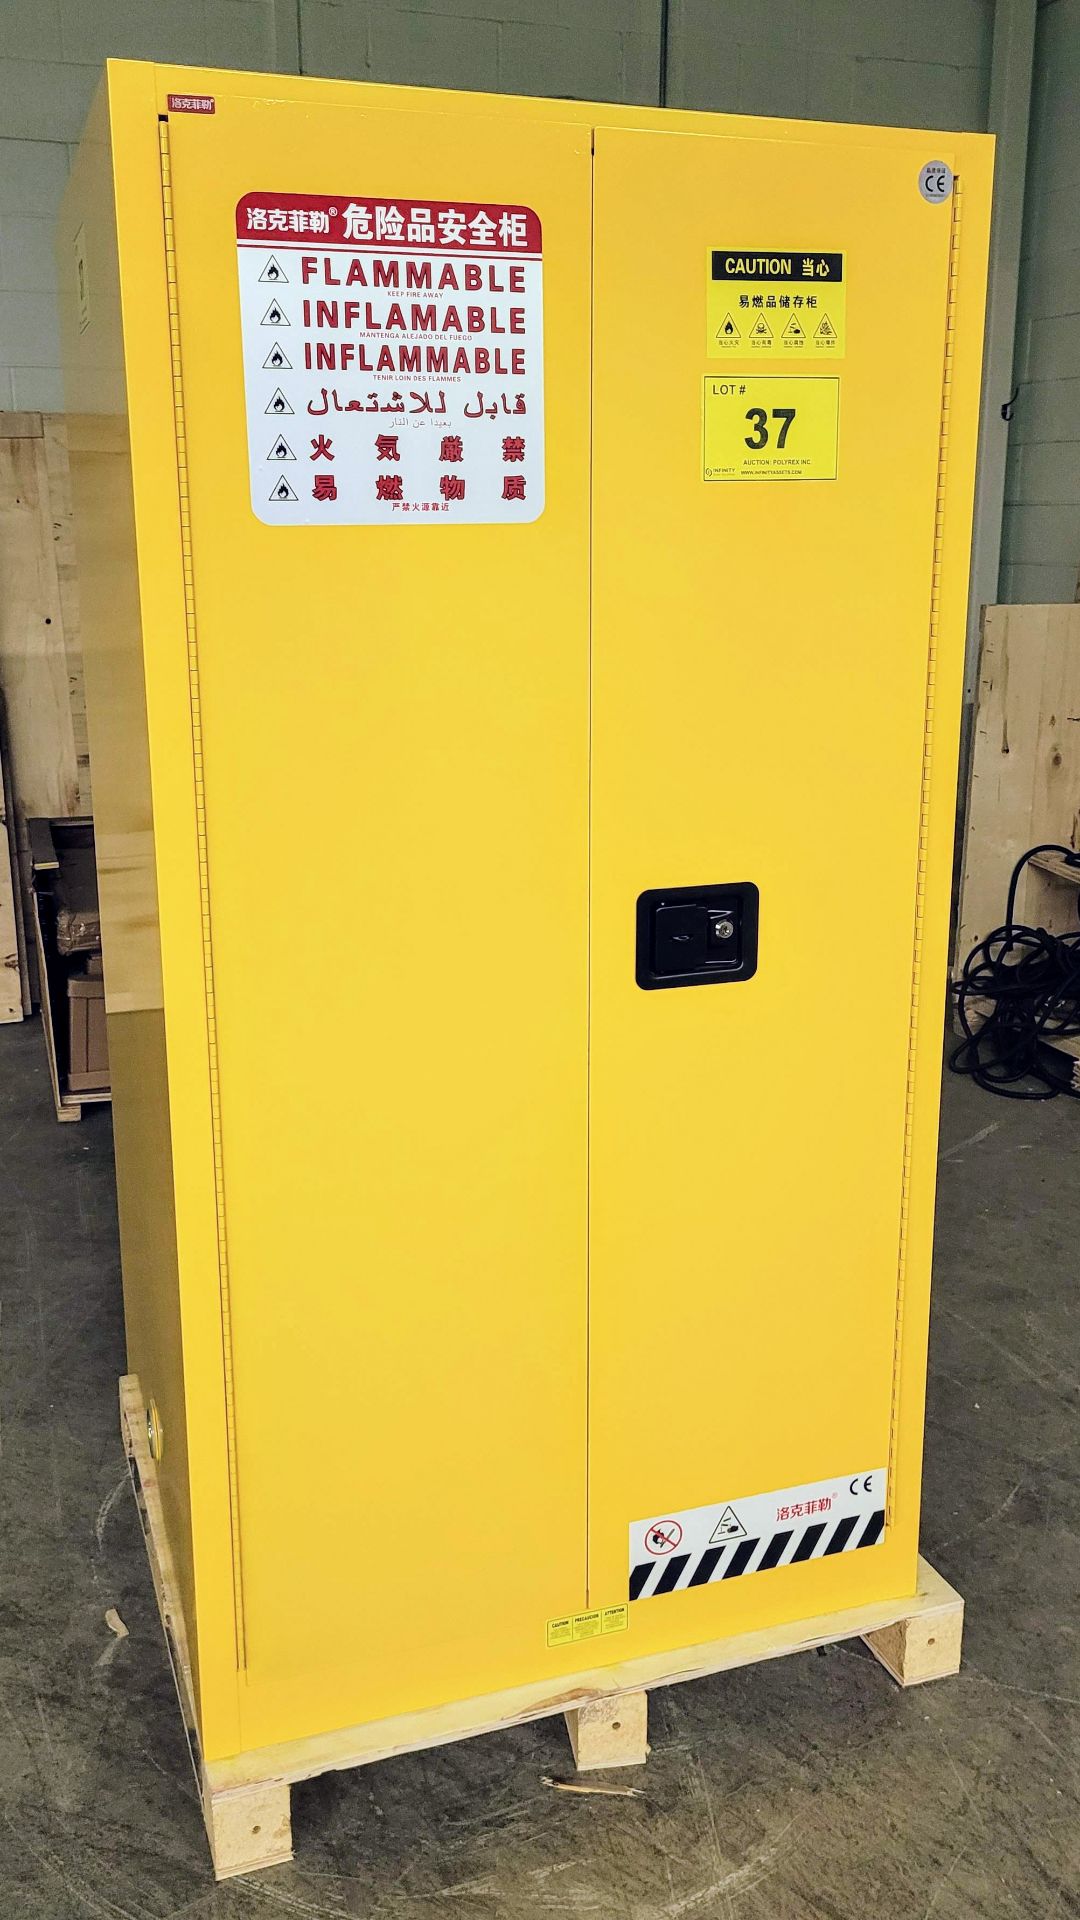 NEW FLAMMABLE TWO DOOR STORAGE CABINET - (34"L X 34"W X 65"H)